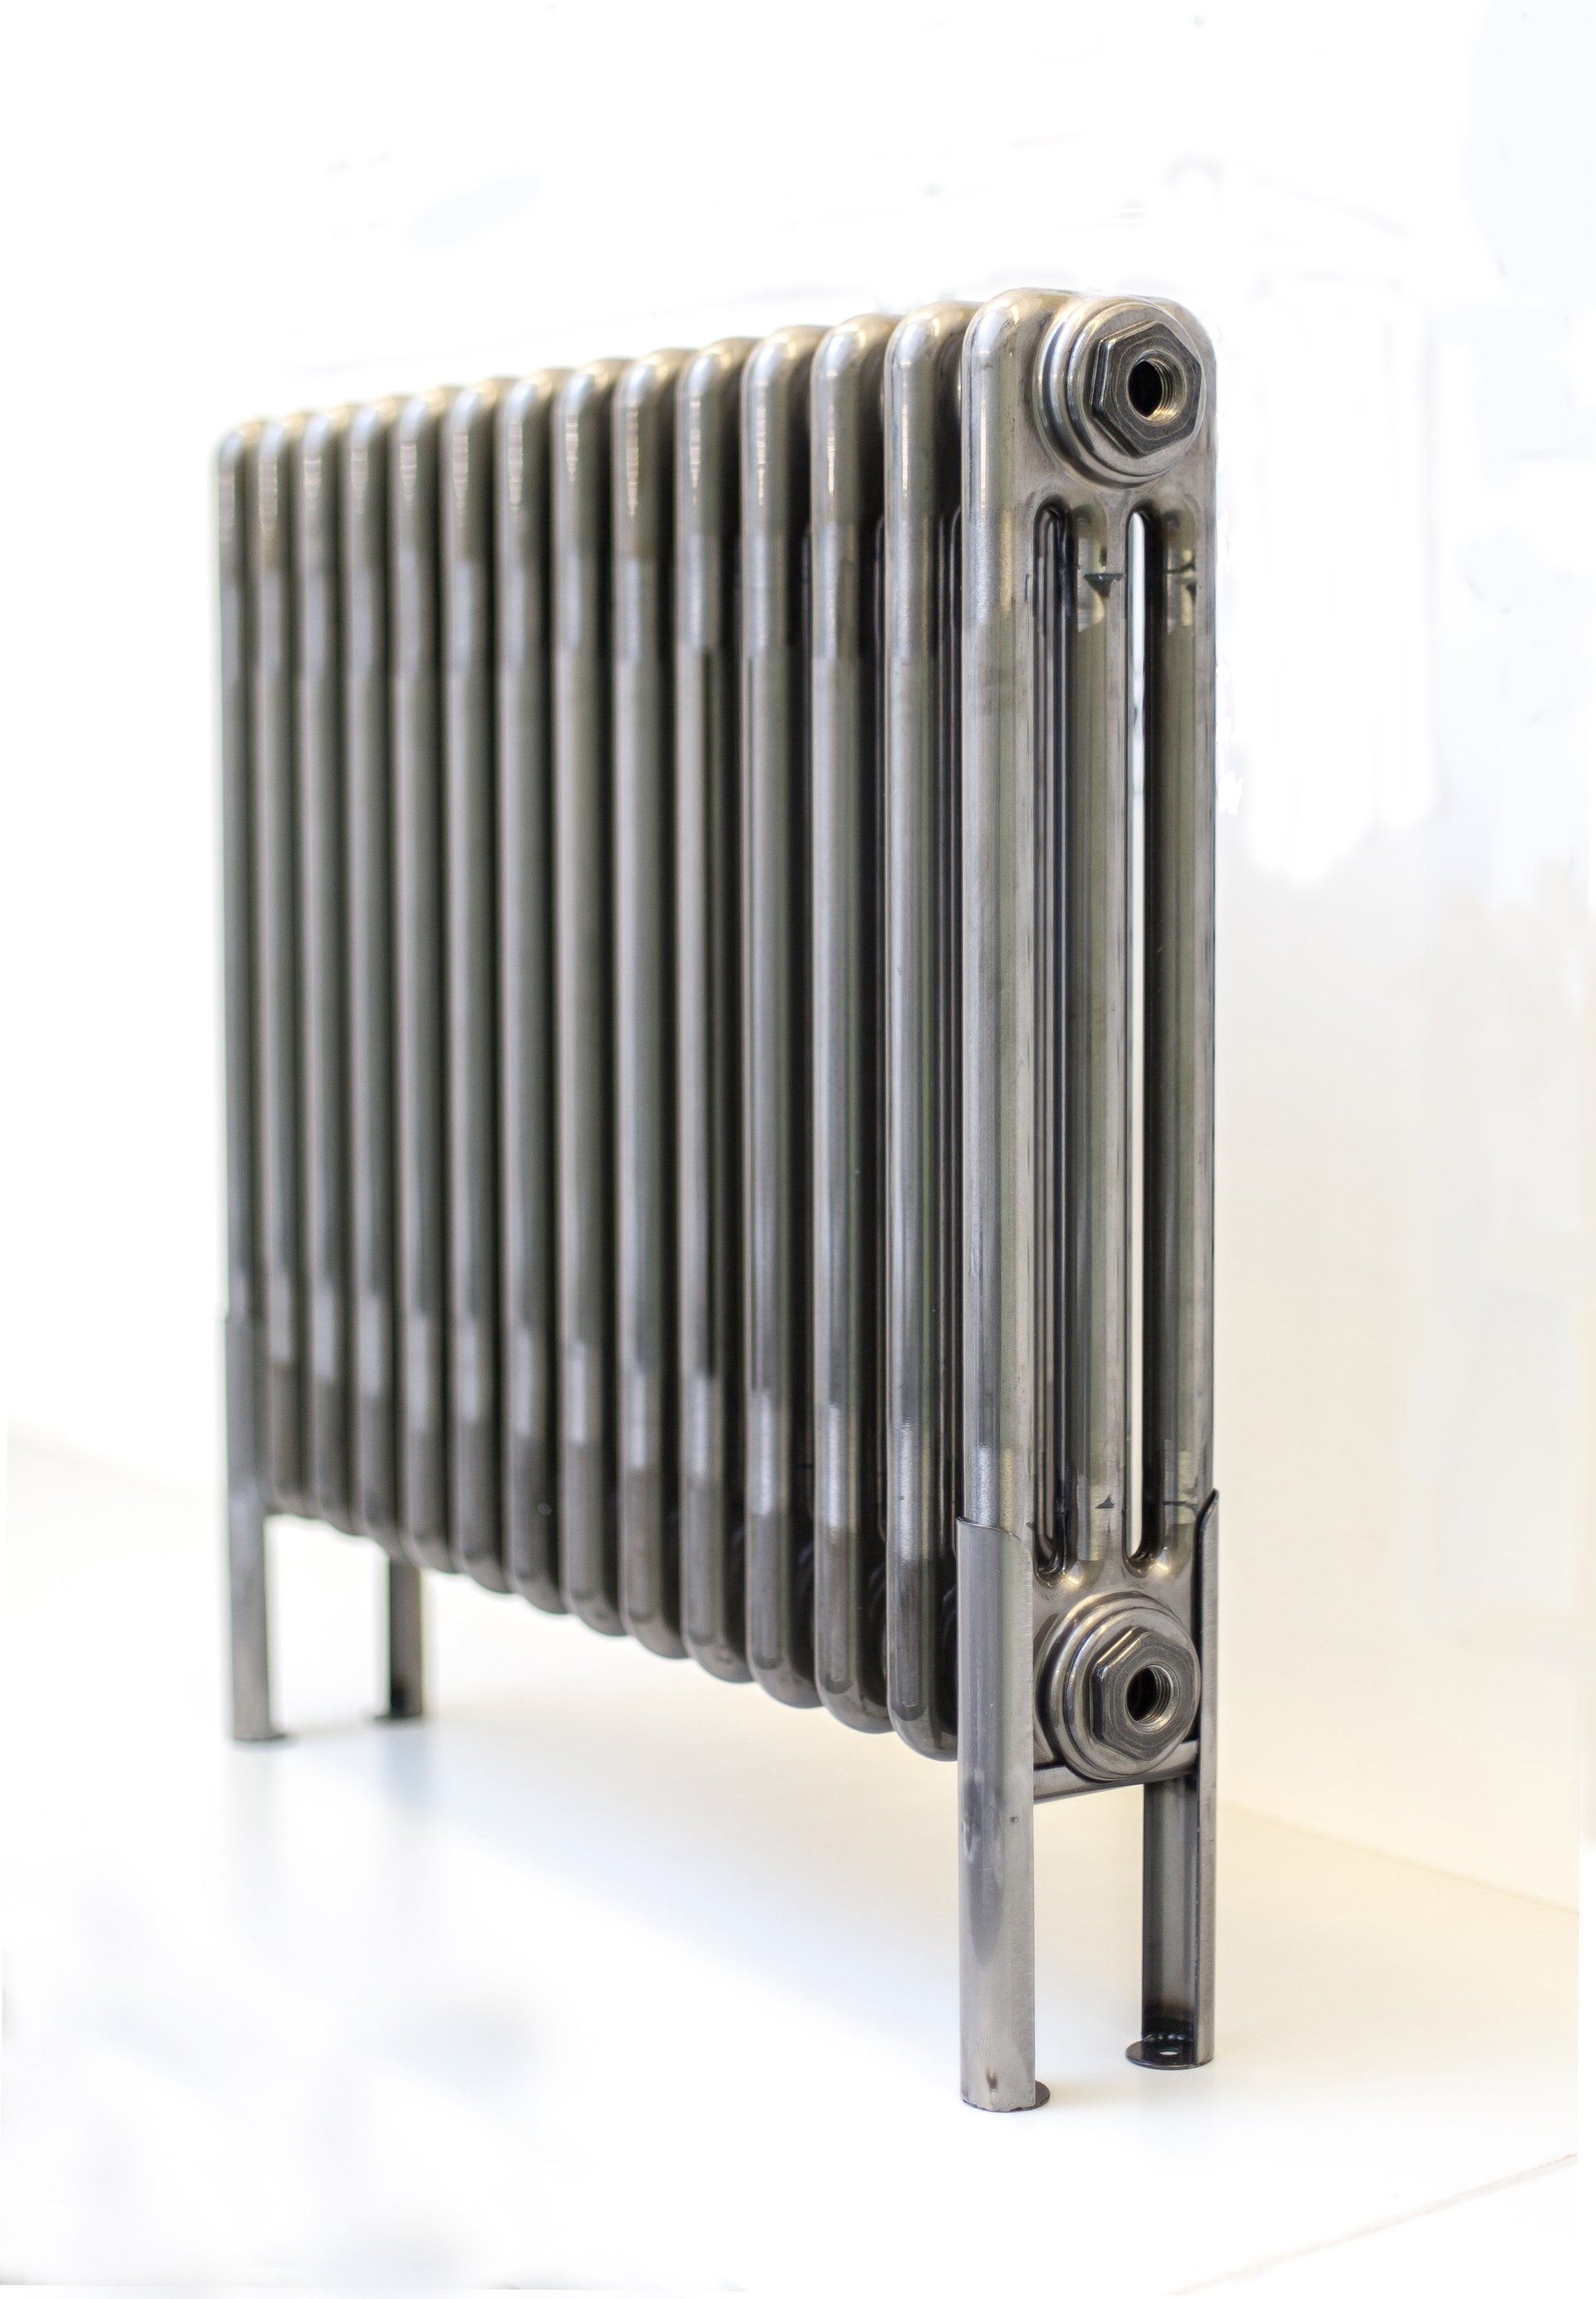 Core lacquered steel electric radiator